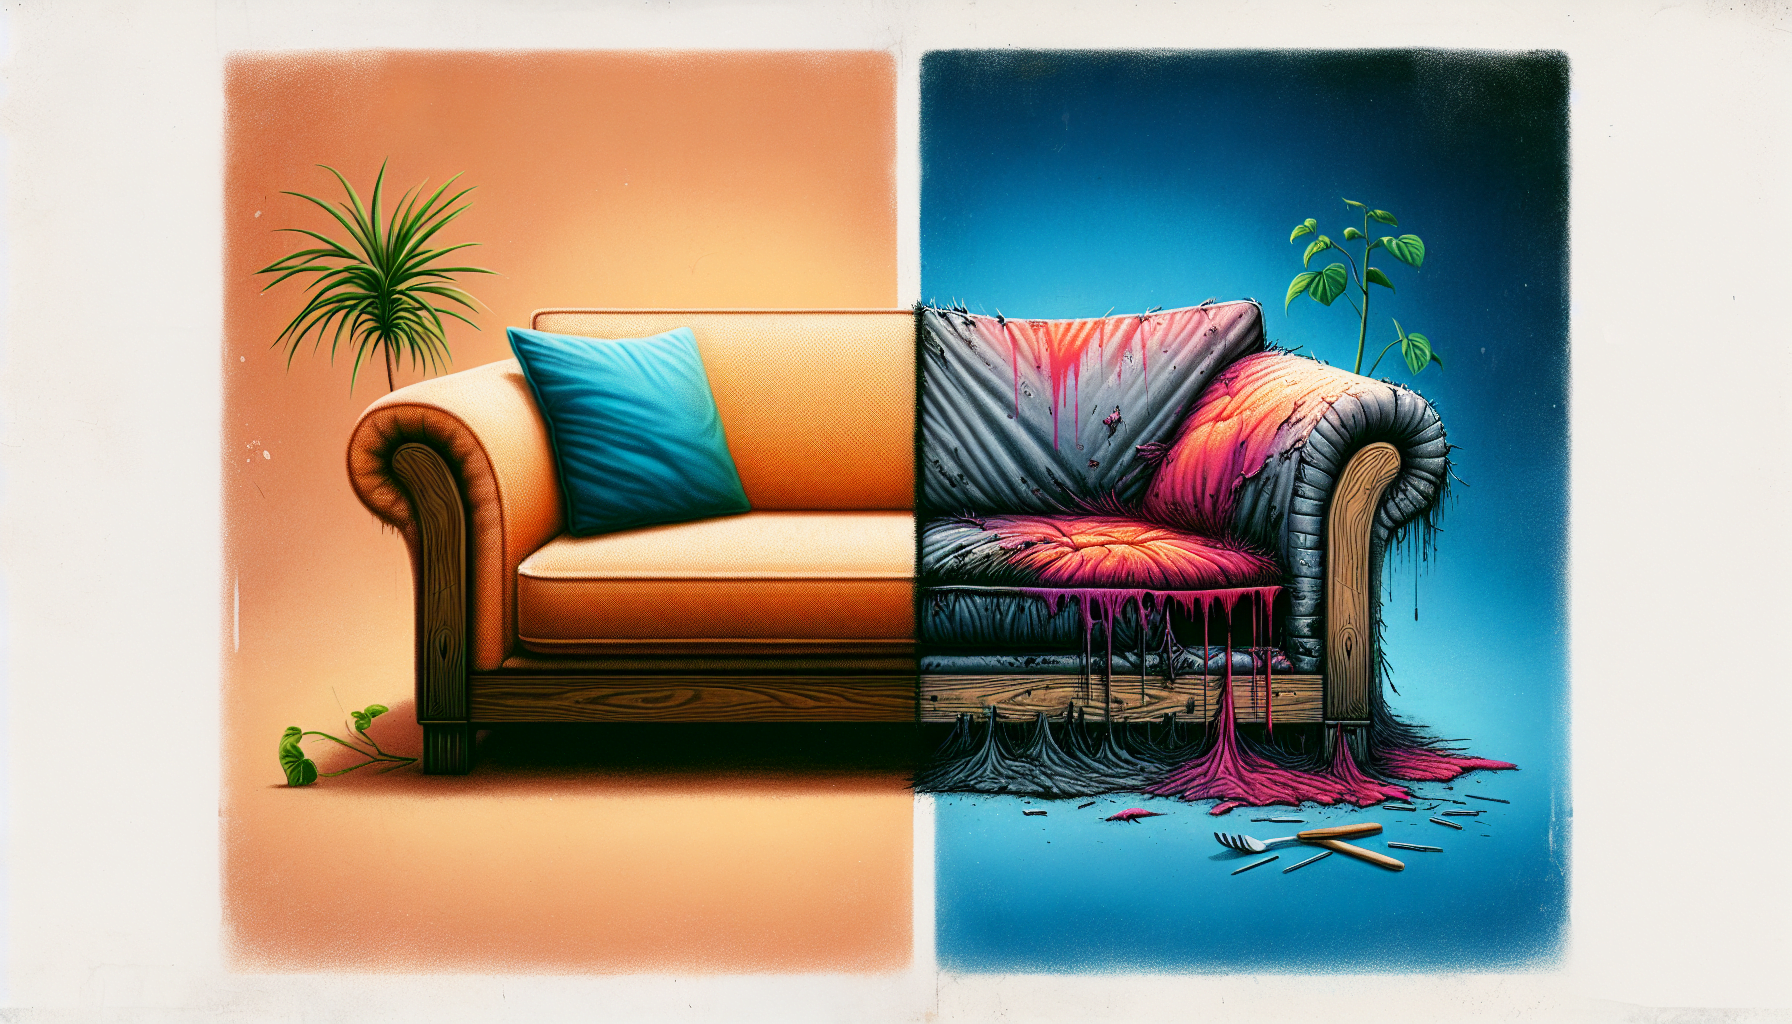 Comparison of a gently used sofa and a stained, broken sofa